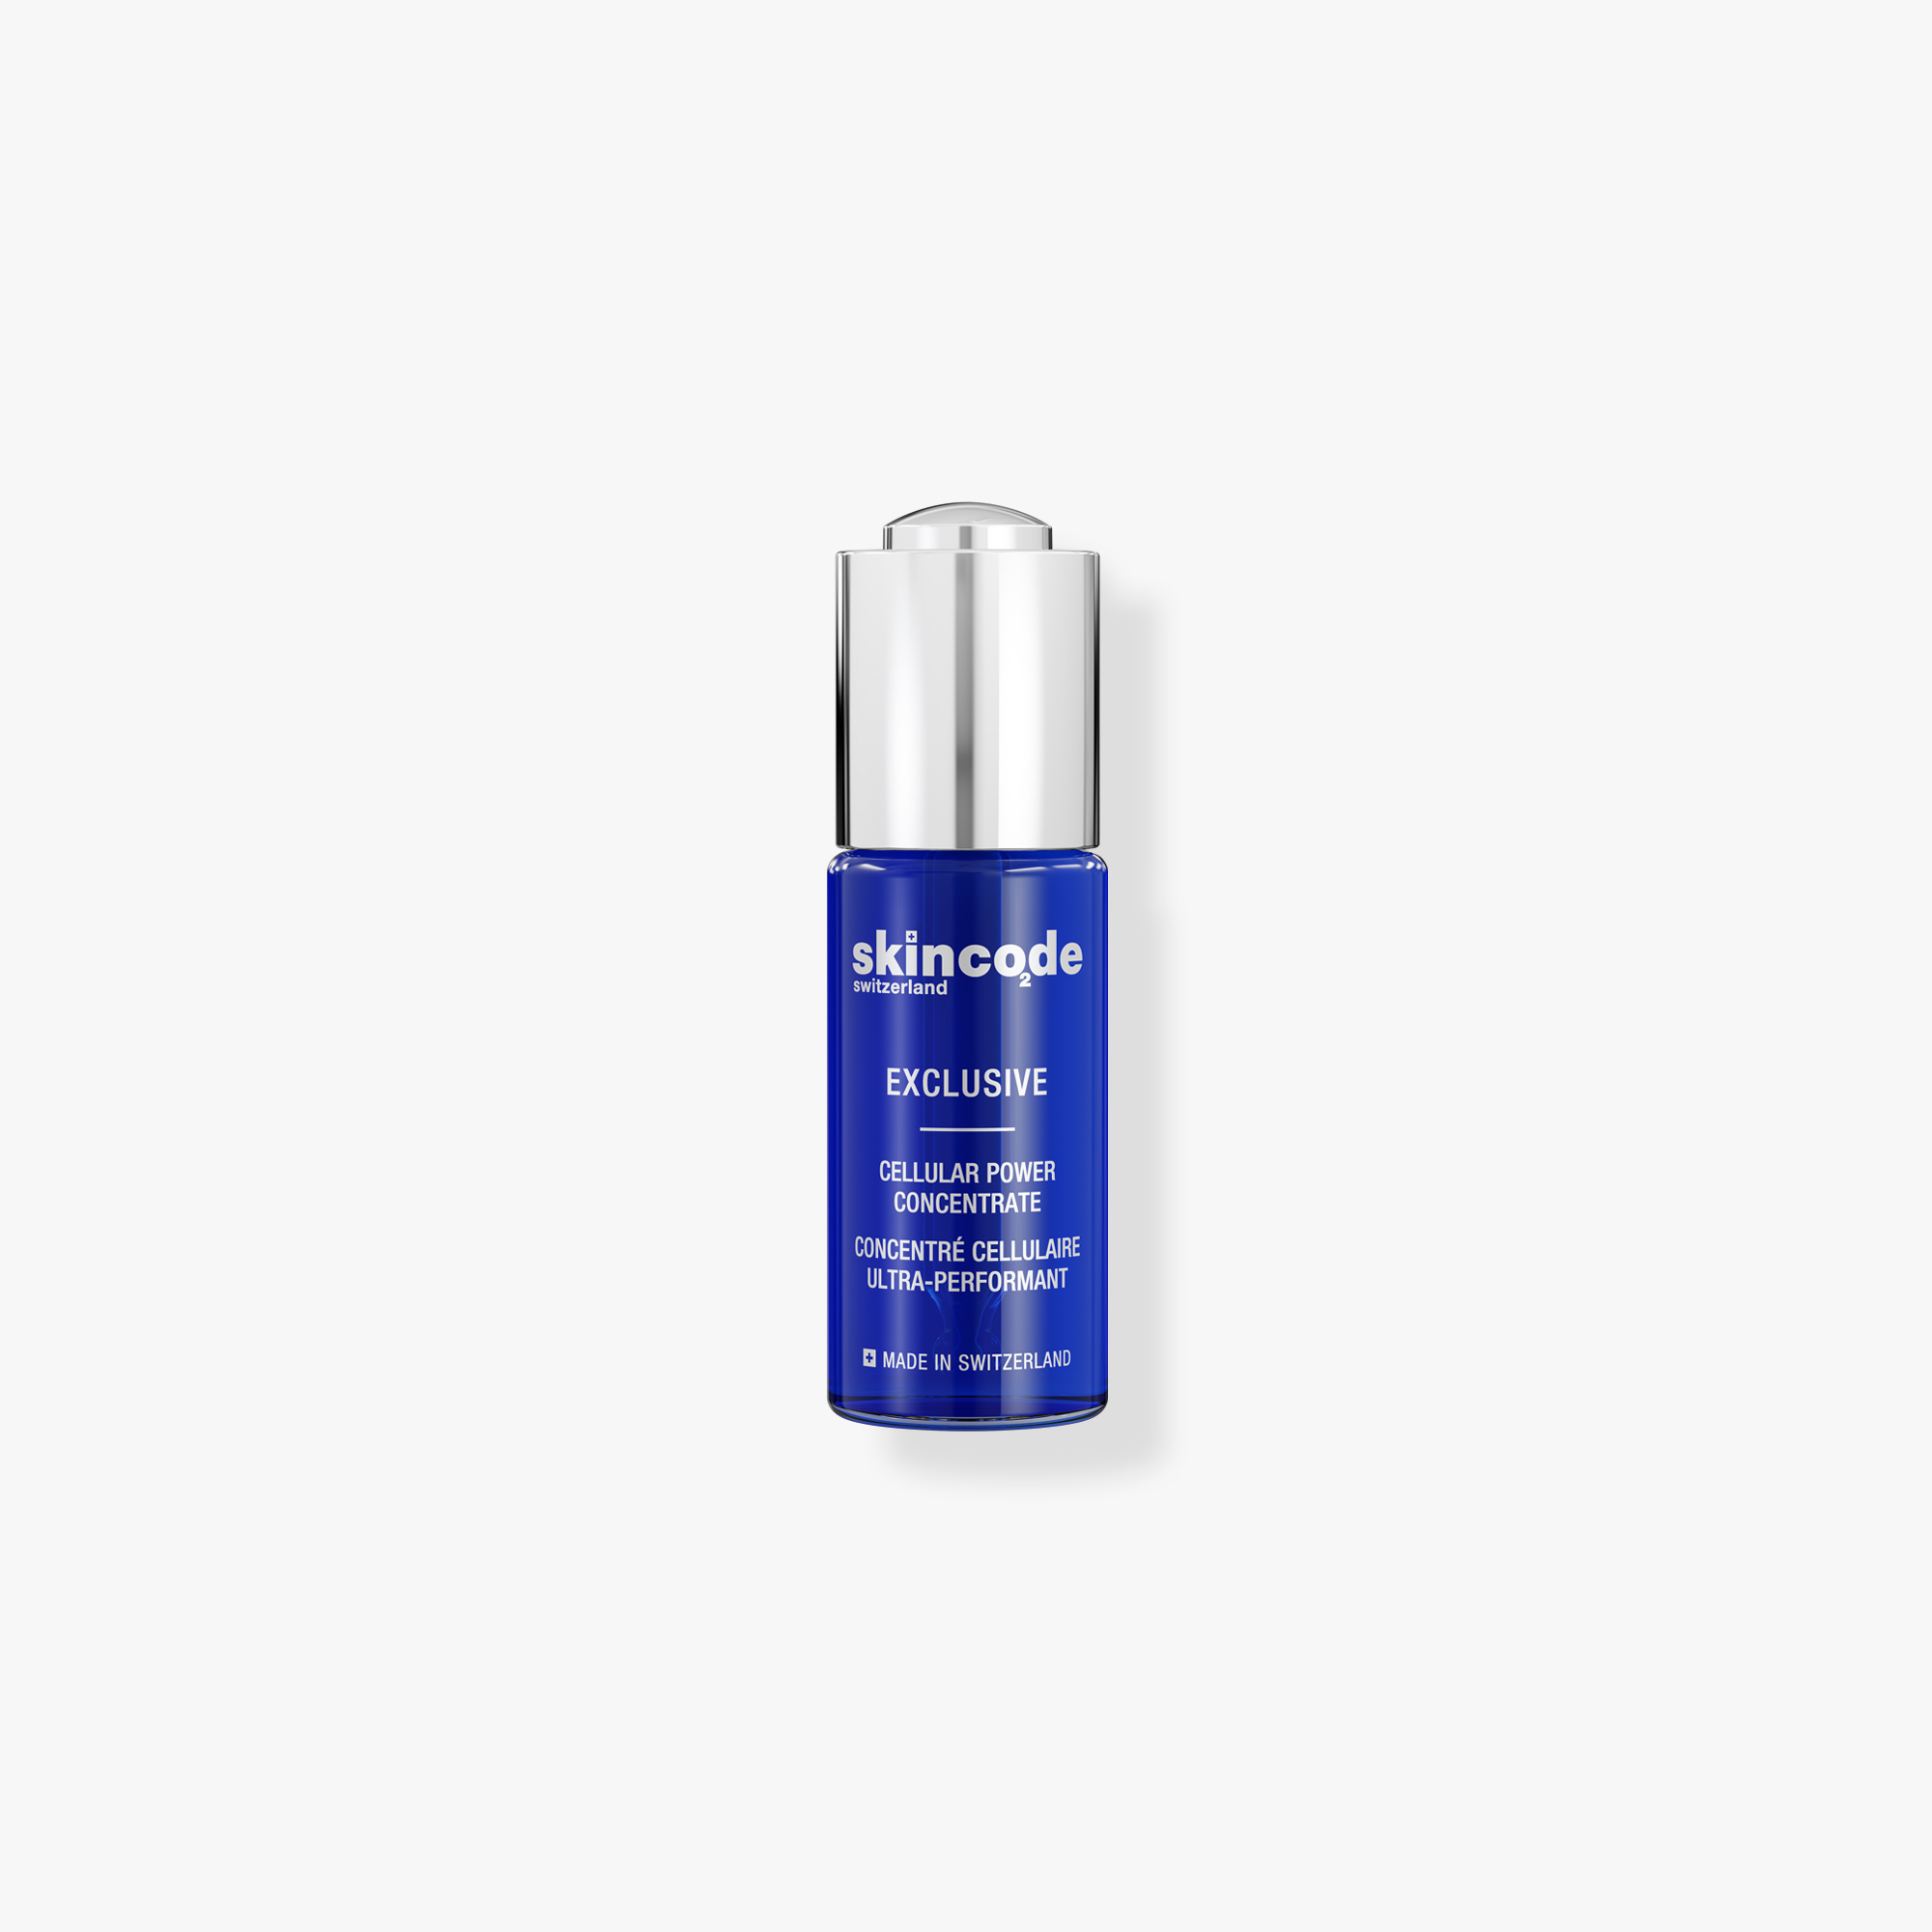 Skincode Cellular Power Concentrate, 30ml